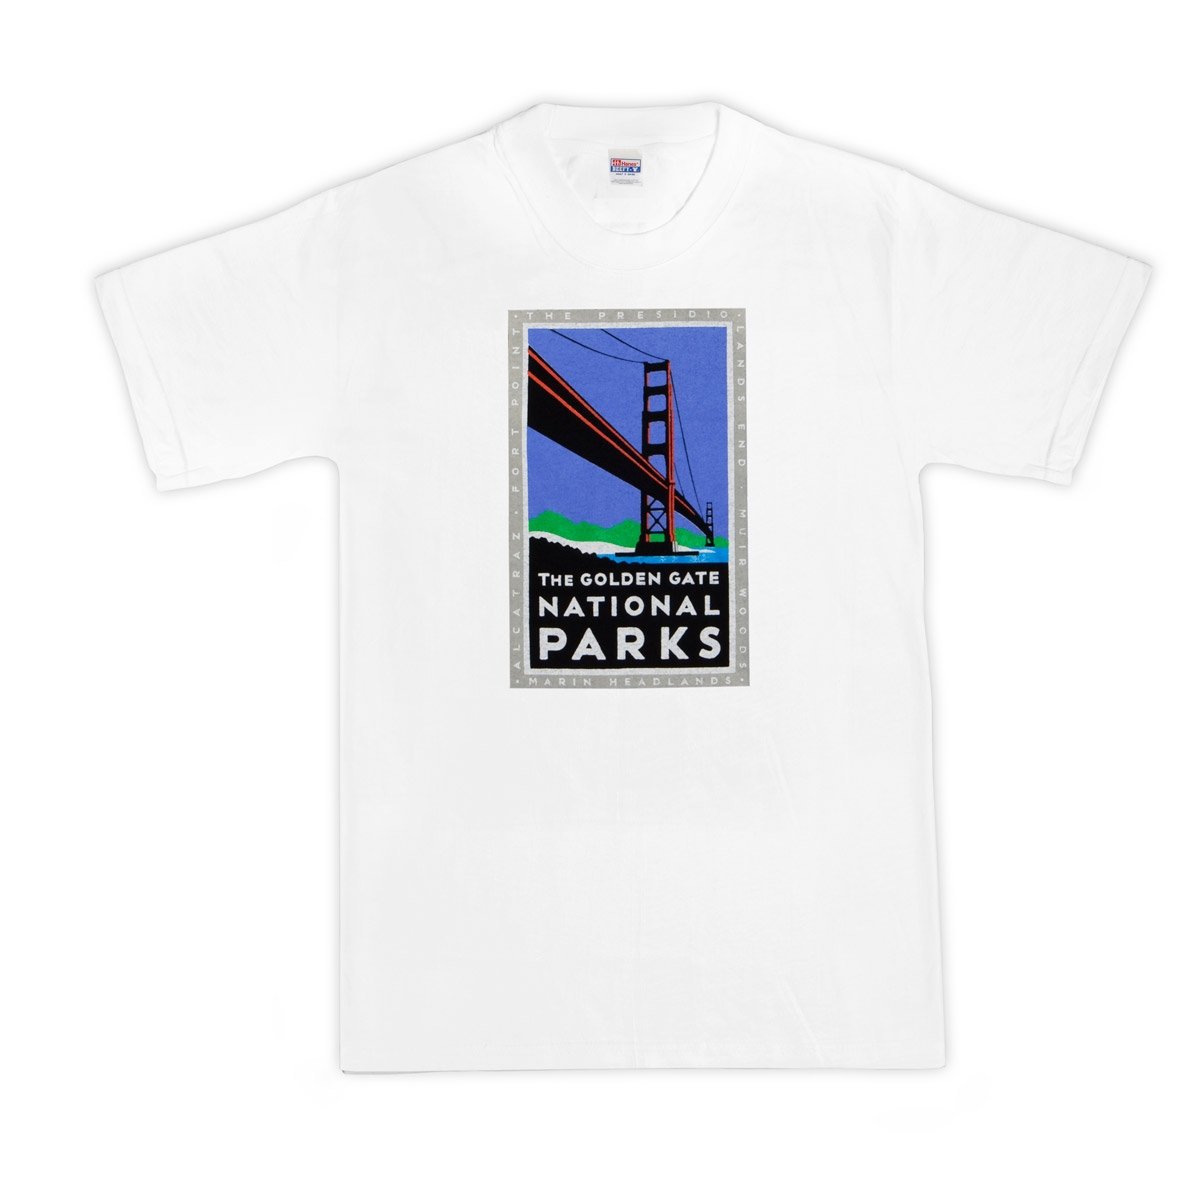 White kids t-shirt with colorful screen-printed Golden Gate National Parks Bridge design on chest. Artwork by Michael Schwab.